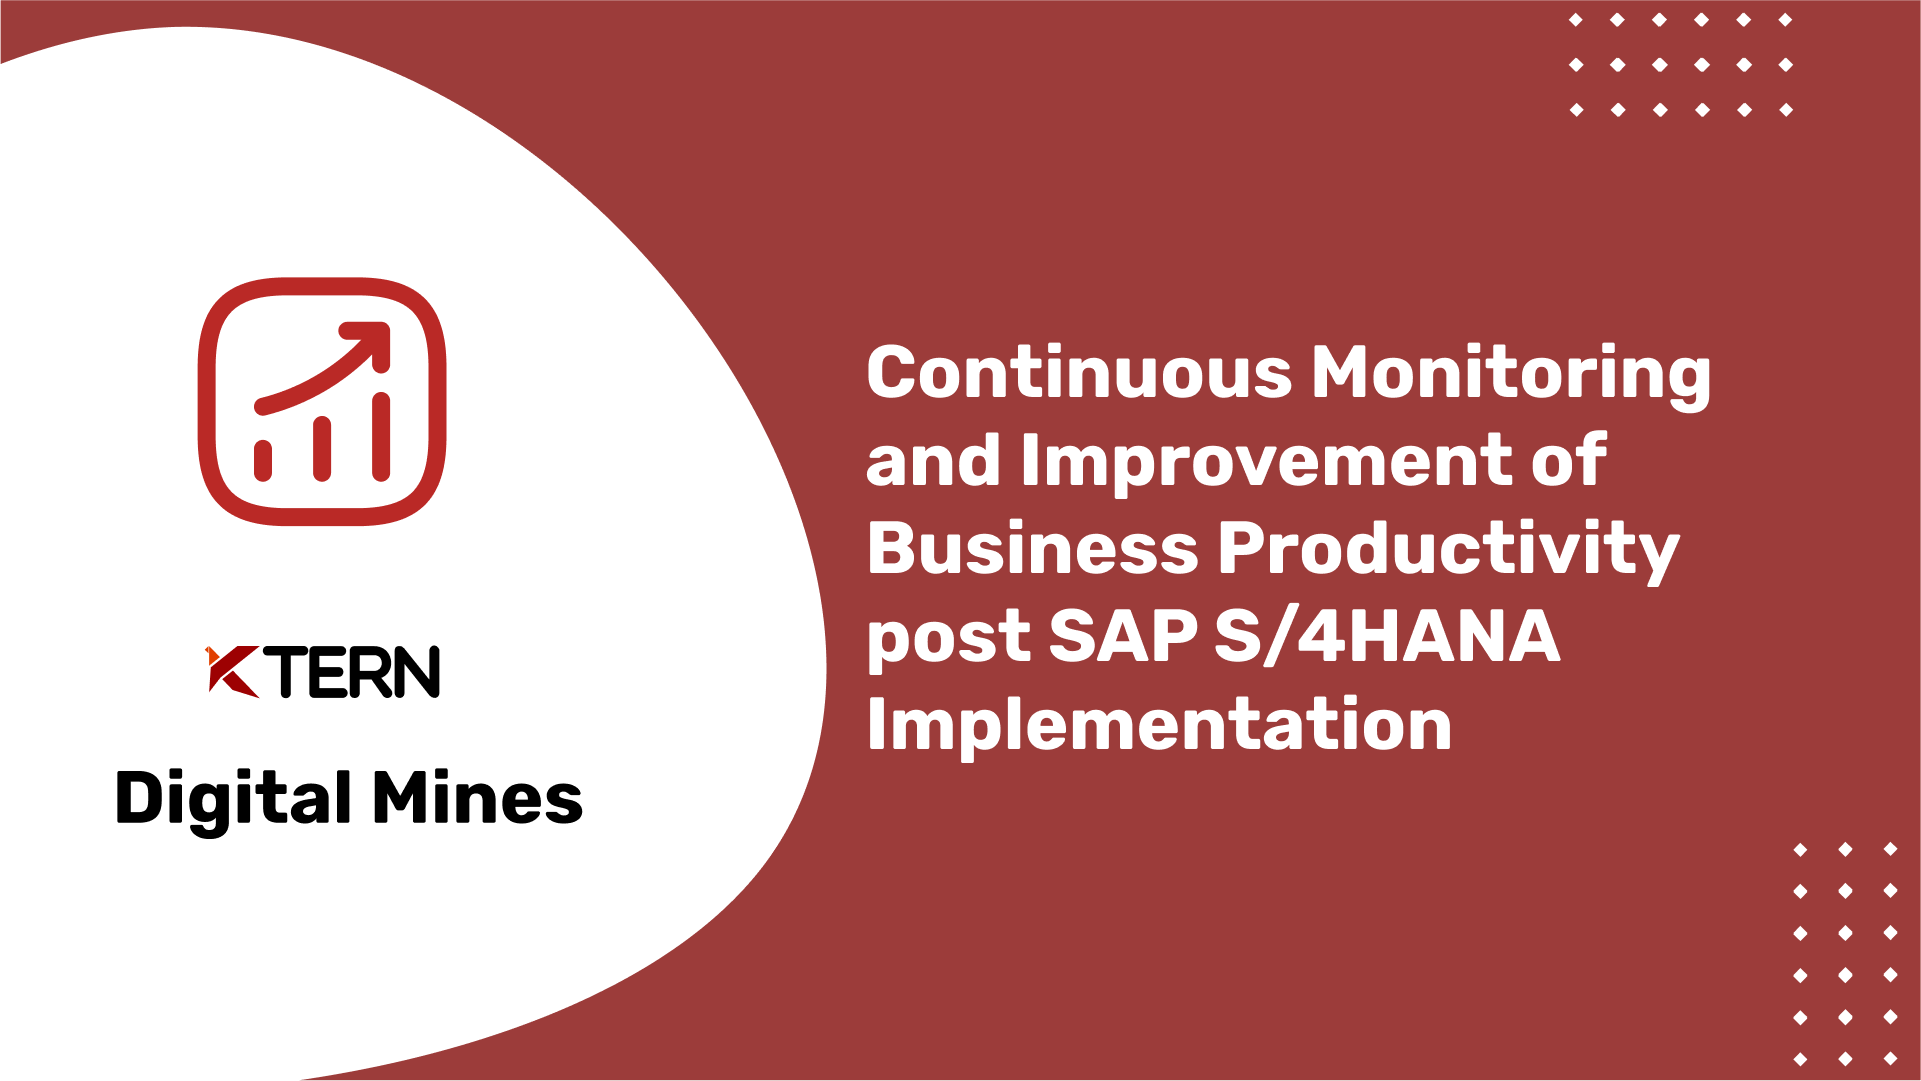 Continuous Monitoring and Continuous Improvement of Business Productivity post SAP S/4HANA Implementation